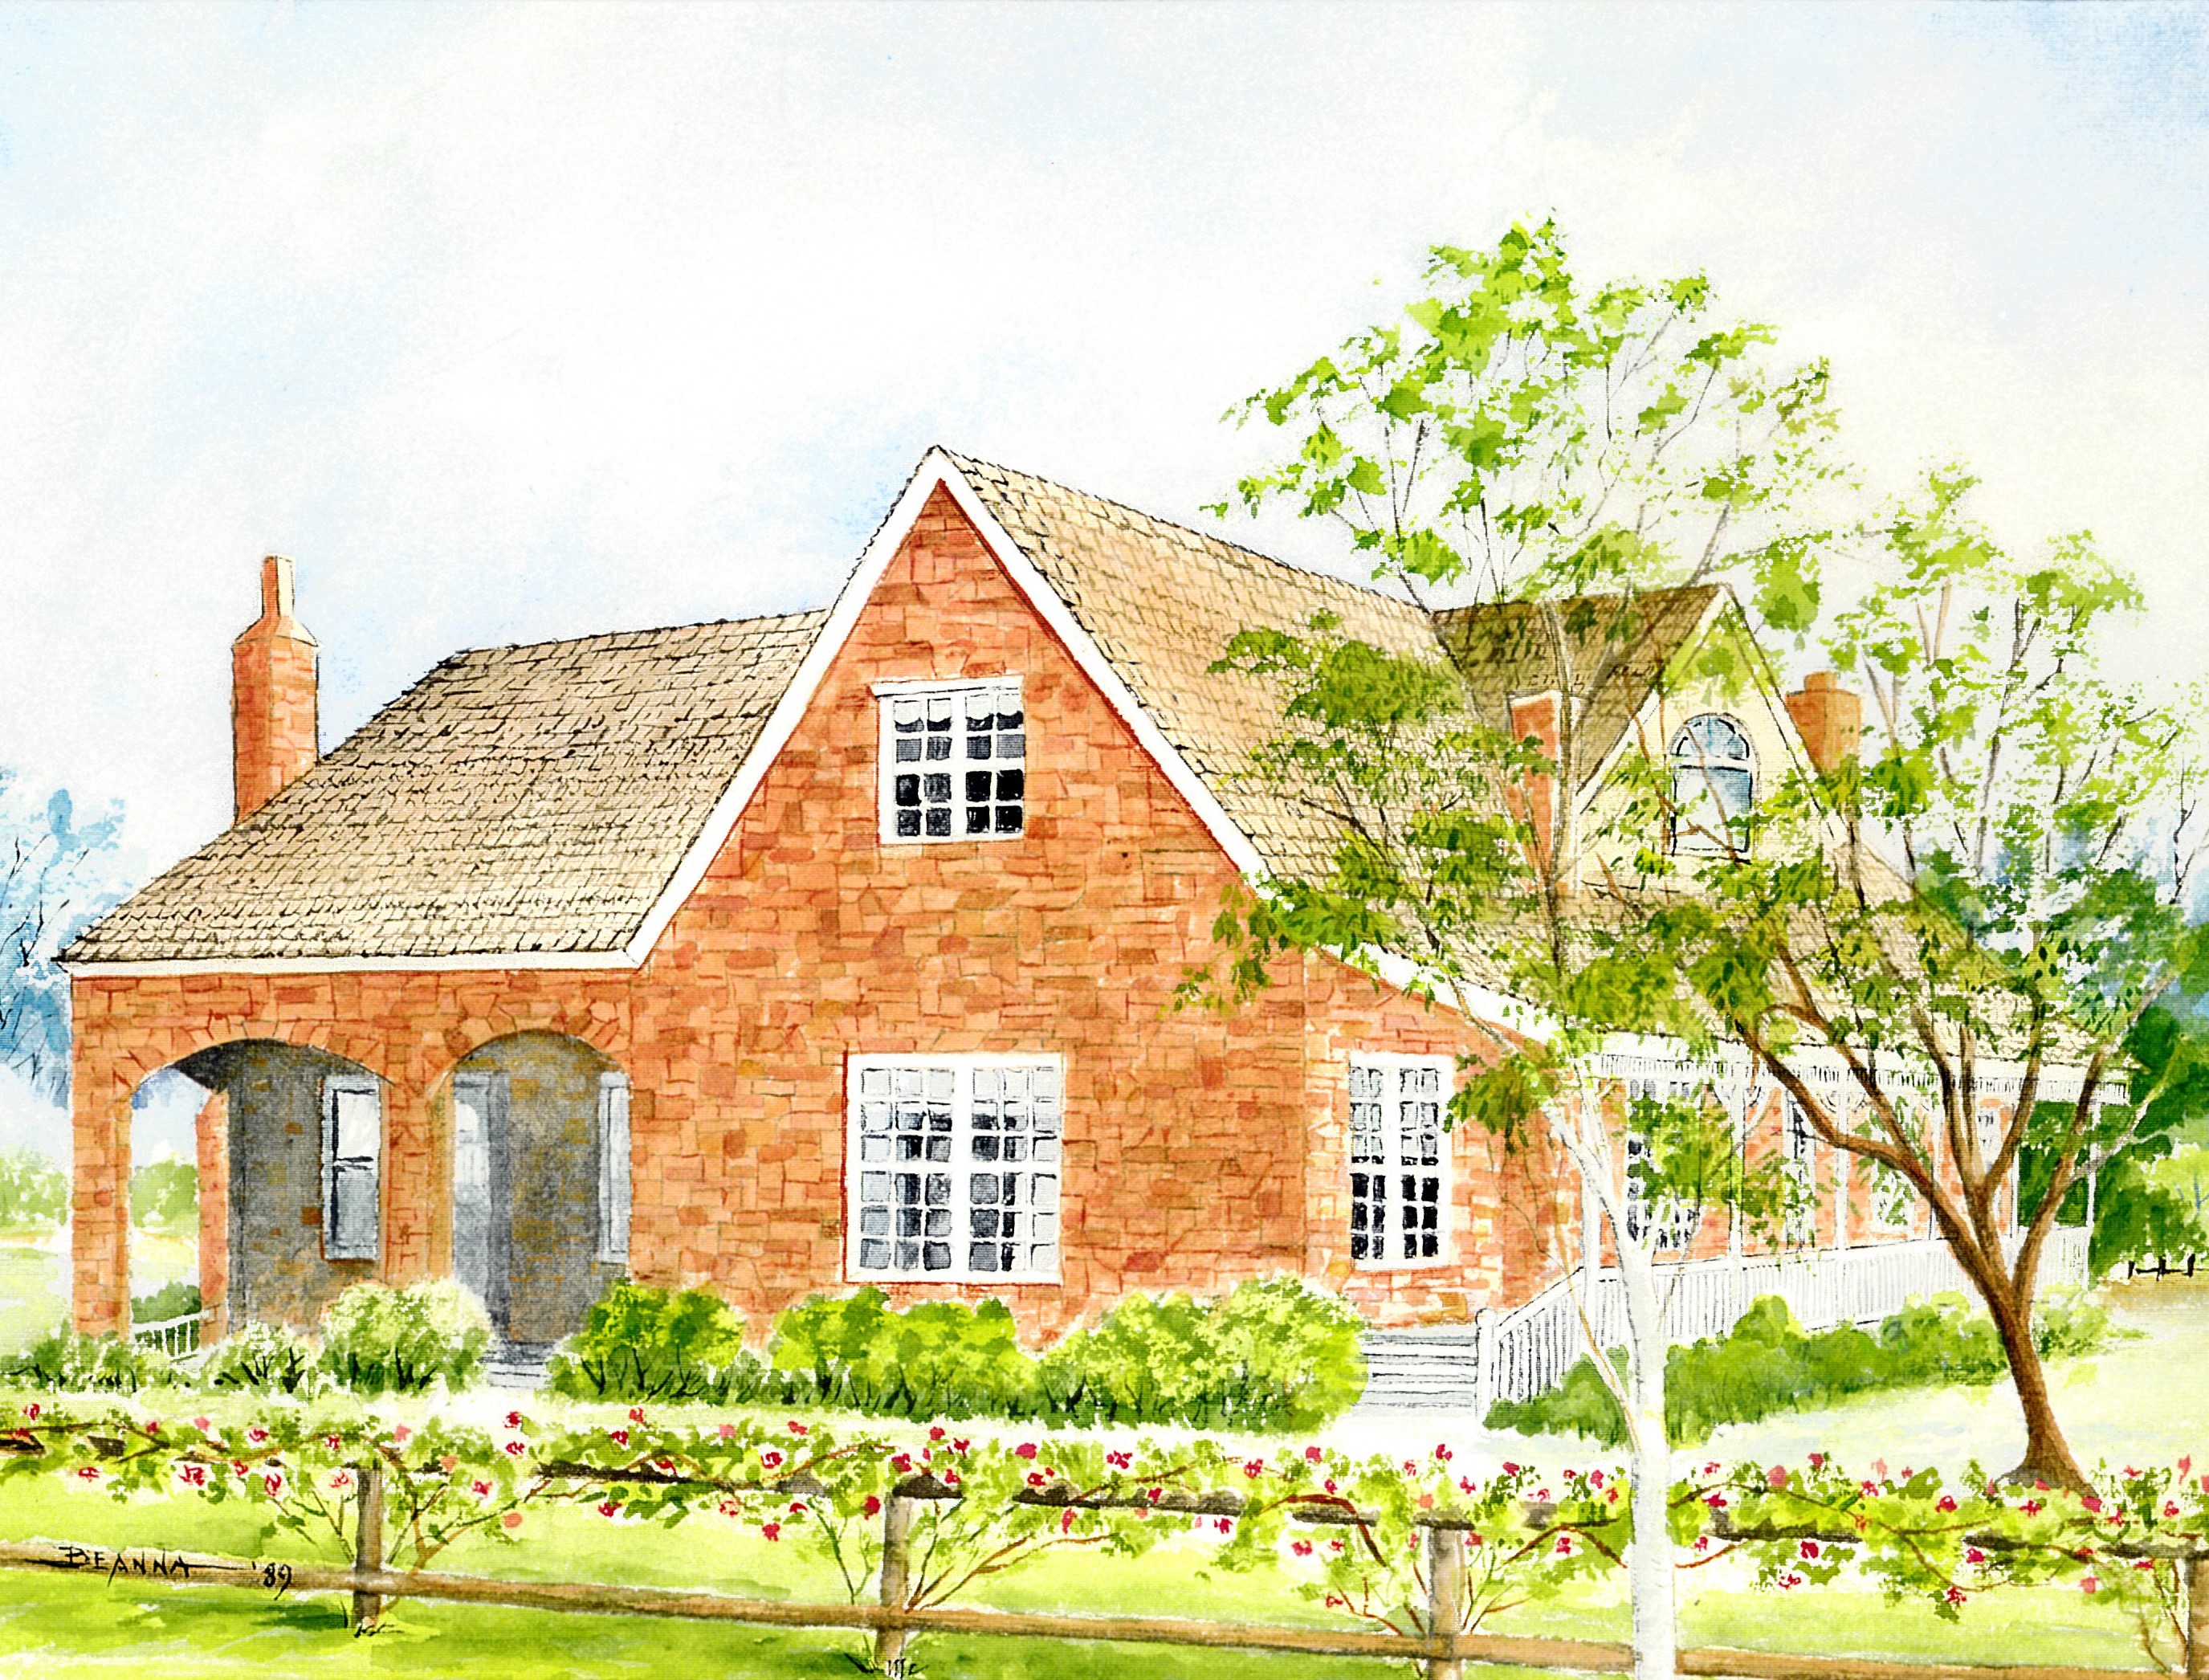 Watercolor painting of the Sandberg-Nisson home